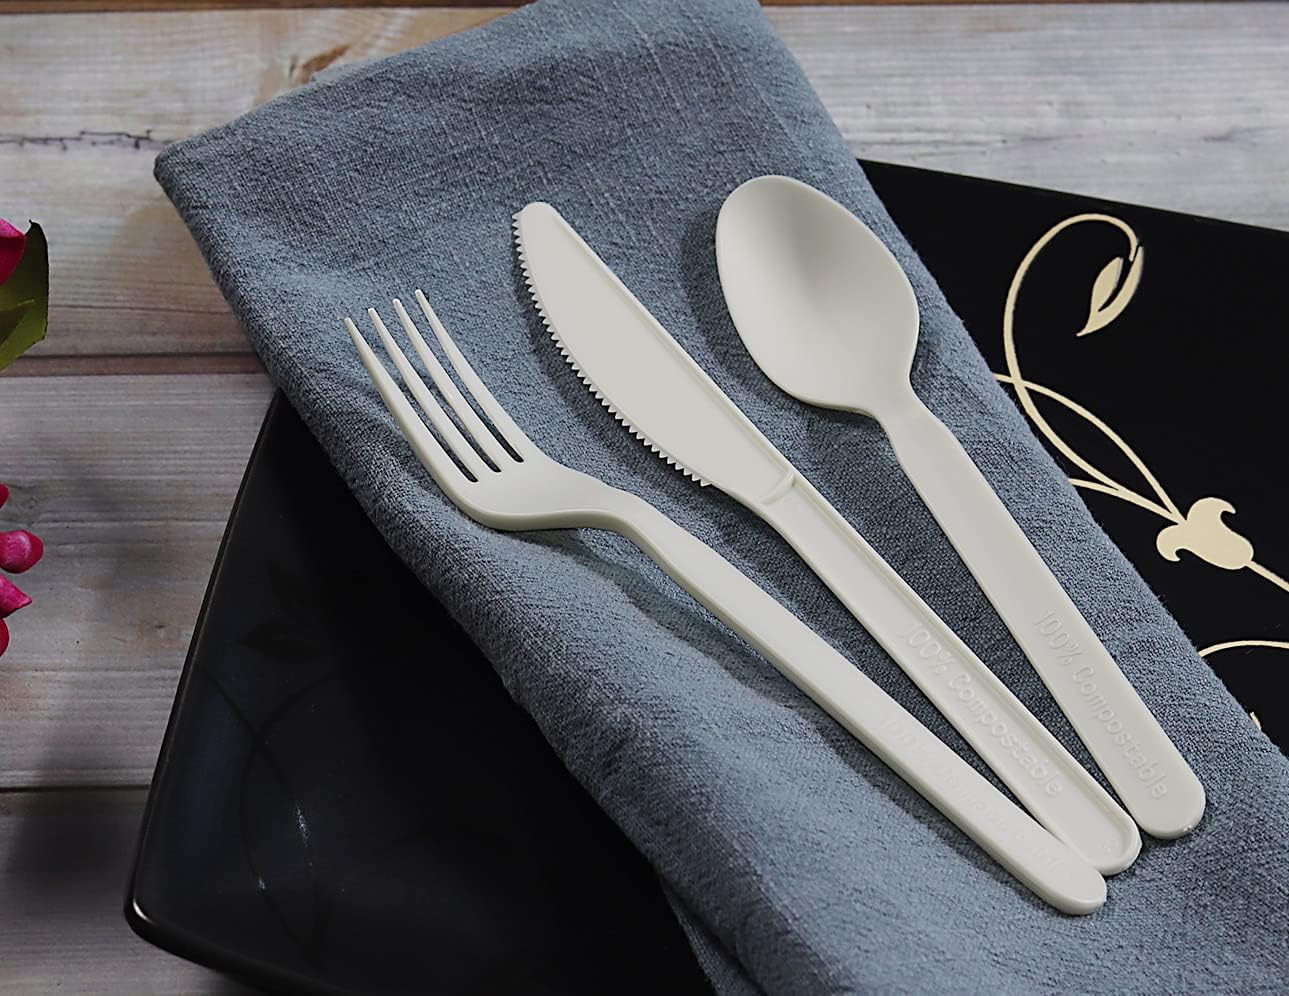 150 Count 7" Heavy-duty Compostable Utensils,50 Forks 50 Spoons 50 Knives Cutlery Set,BPI Certified Large Disposable Flatware Set